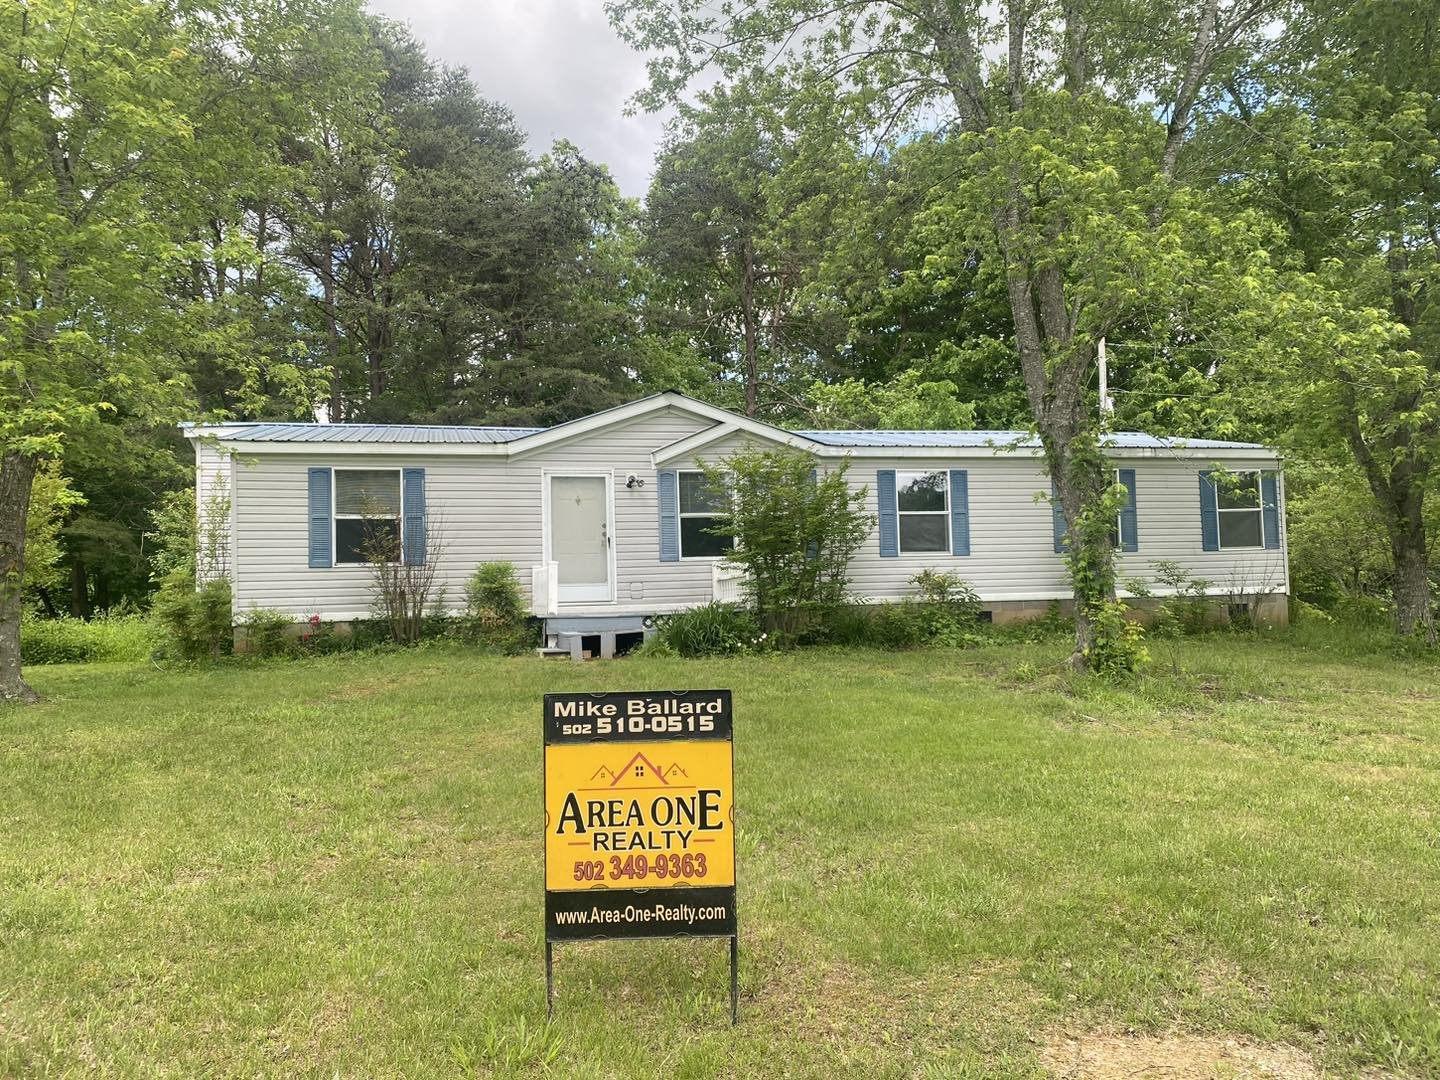 Let&rsquo;s go take a look at Area One Realty&rsquo;s NEWEST Listing at 1115 McCubbins Lane offered by Mike &amp; Kathy Ballard!

‼️‼️NEW LISTING ‼️‼️NEW LISTING‼️‼️ Take a look at Area One Realty&rsquo;s GREAT NEW LISTING at 1115 McCubbins Lane offe